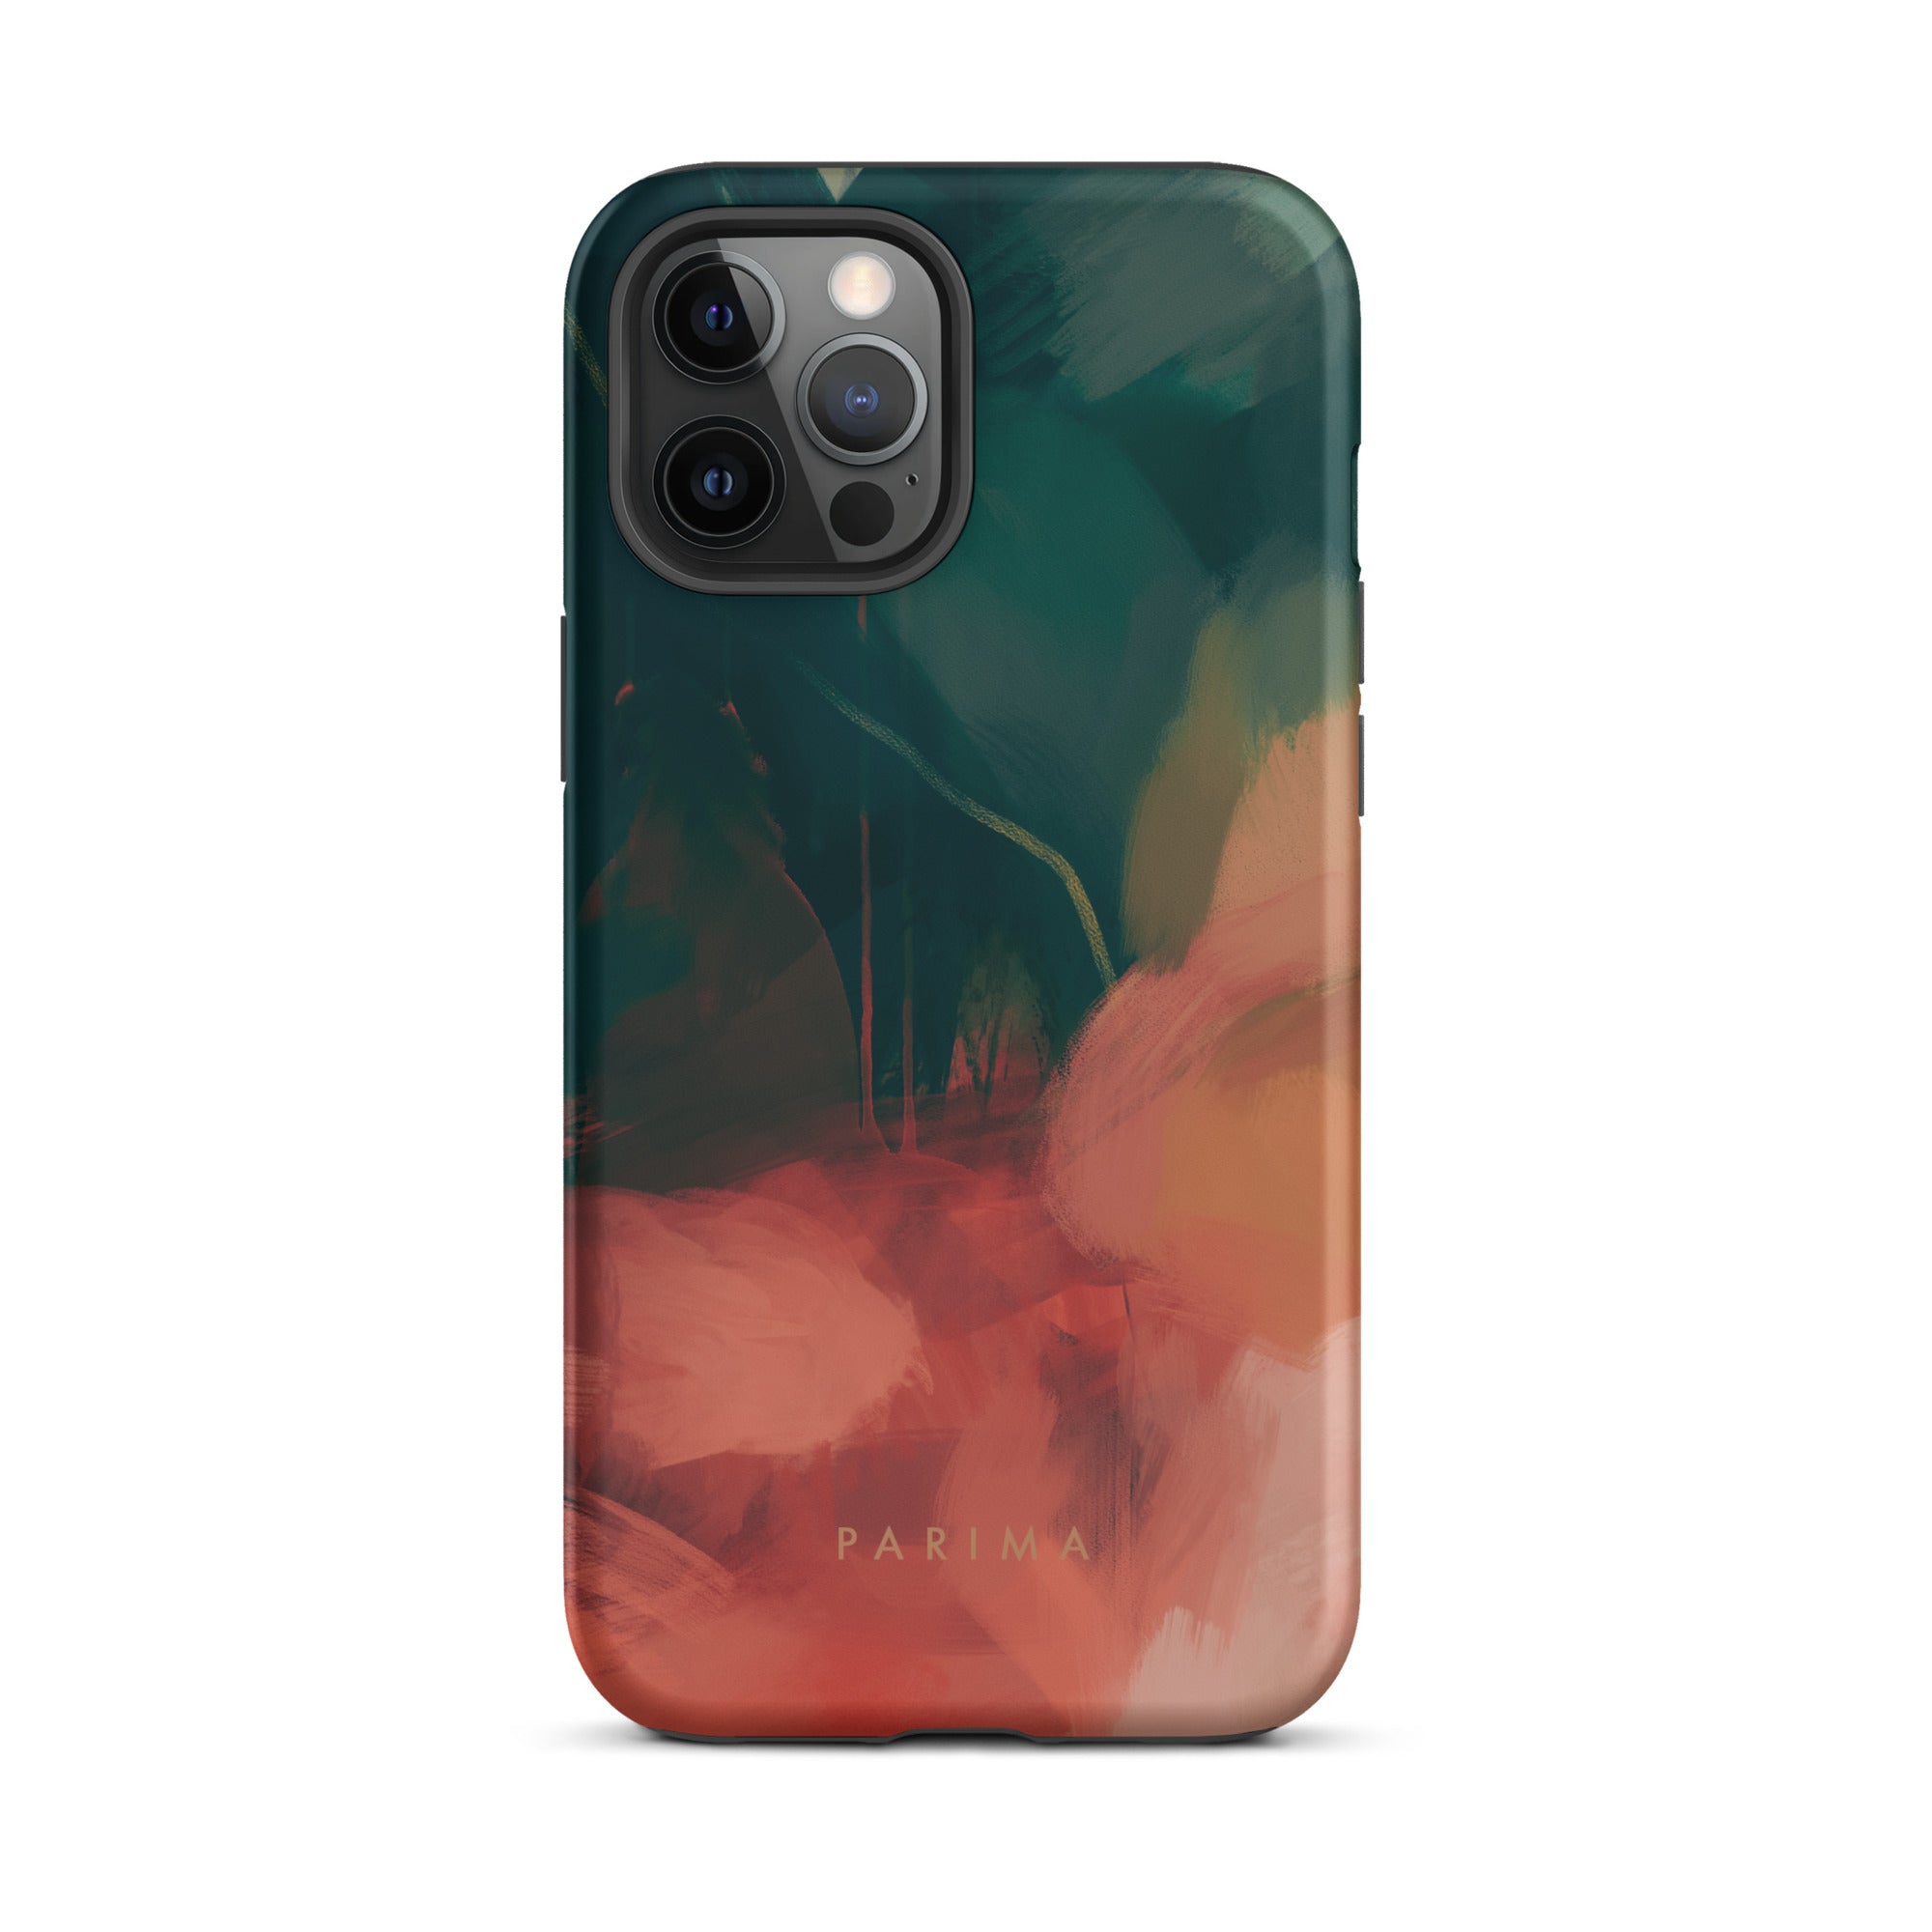 Eventide, green and red abstract art - iPhone 12 Pro Max tough case by Parima Studio